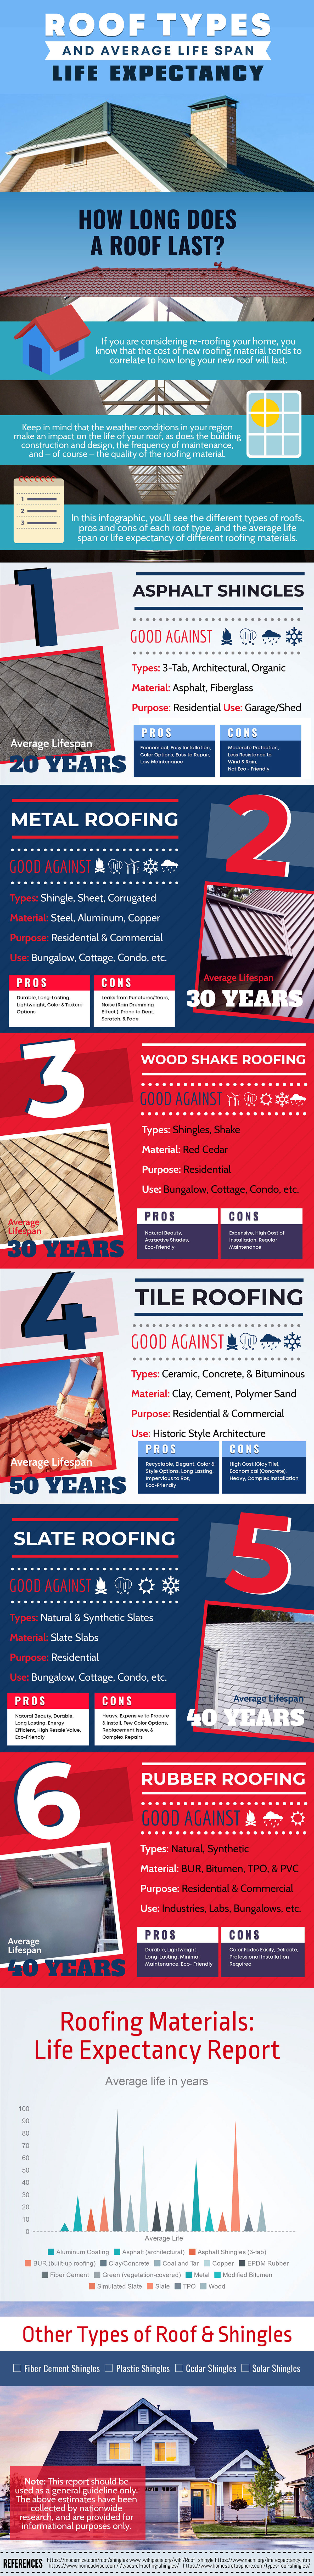 infographic comparing different roofing materials